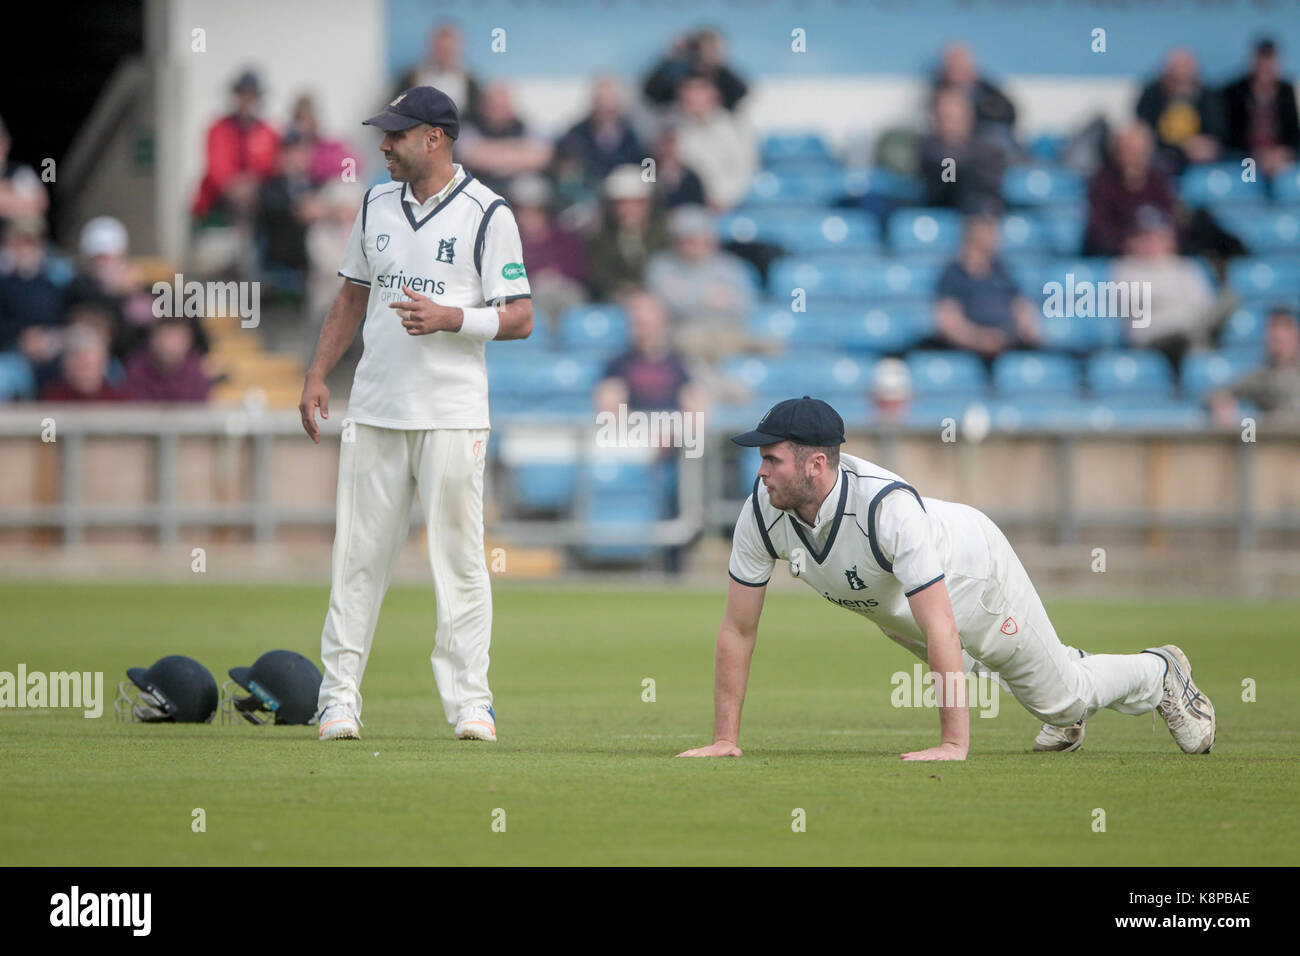 Leeds, UK. 20th Sep, 2017. Dominic Sibley (Warwickshire CCC) picks himself up off the ground having failed to stop a shot by a Yorkshire CCC player. Jeetan Patel (Warwickshire CCC) watches on. Yorkshire CCC v Warwickshire CCC on Wednesday 21 September 2017 at Headingley. Photo by Mark P Doherty. Credit: Caught Light Photography Limited/Alamy Live News Stock Photo